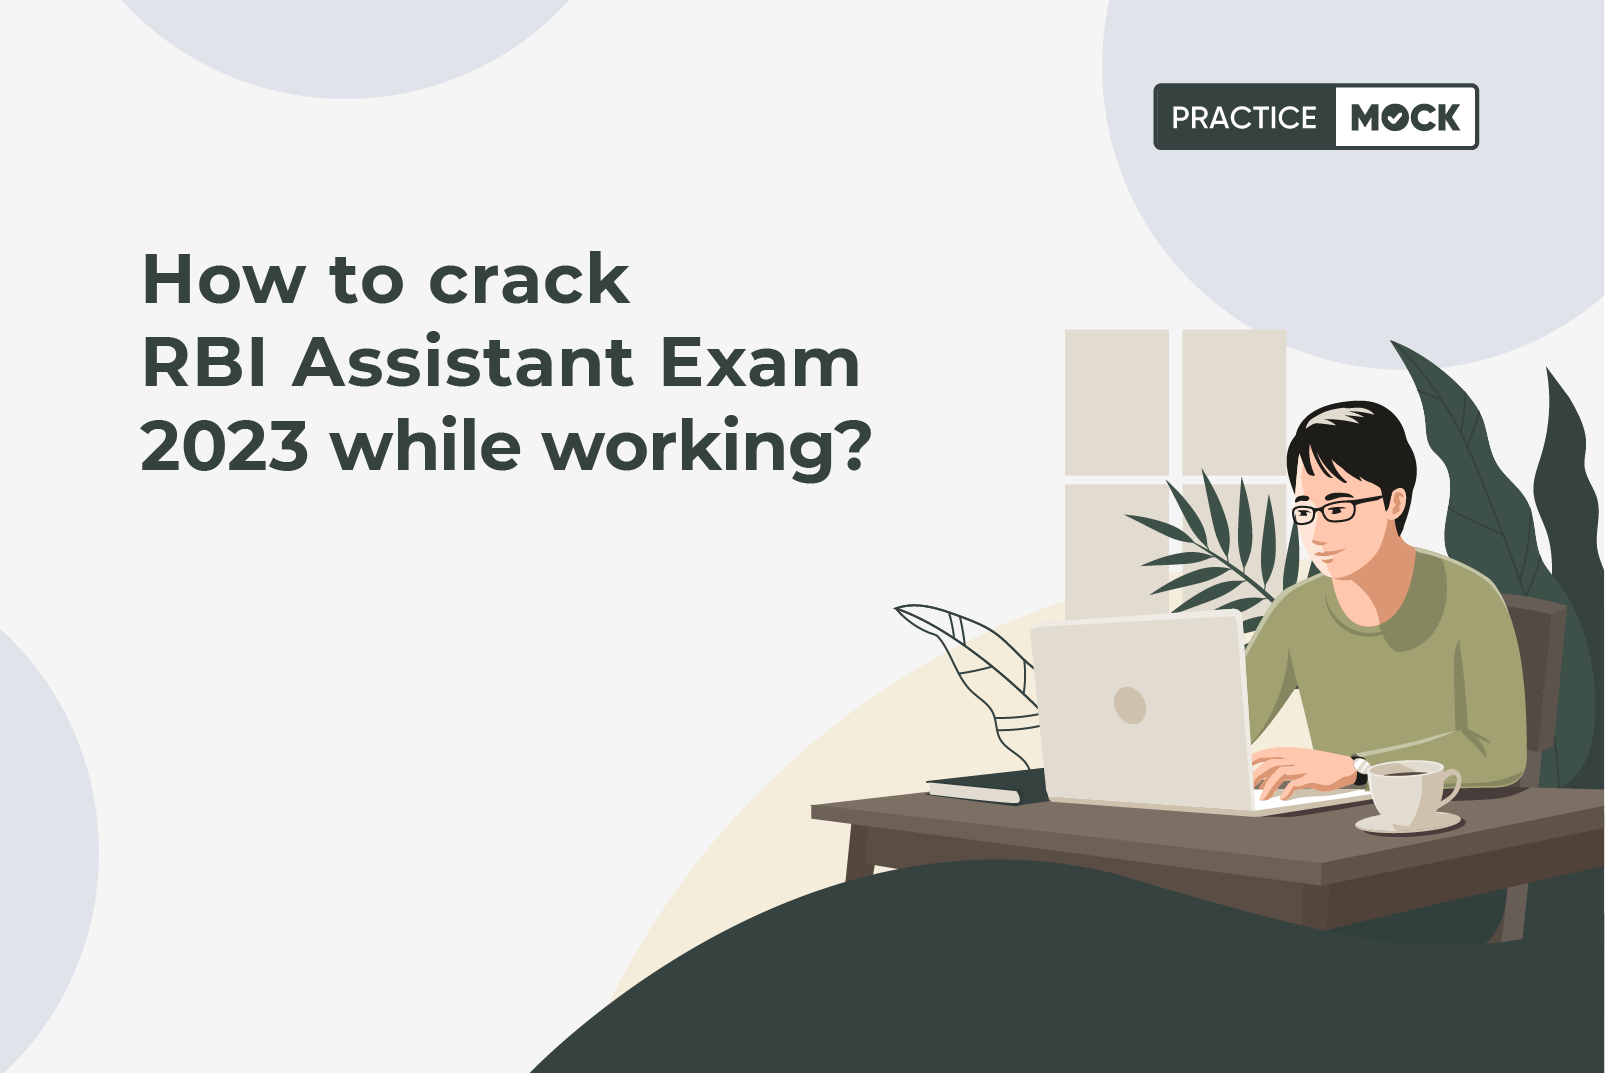 How to crack RBI Assistant Exam 2023 while working